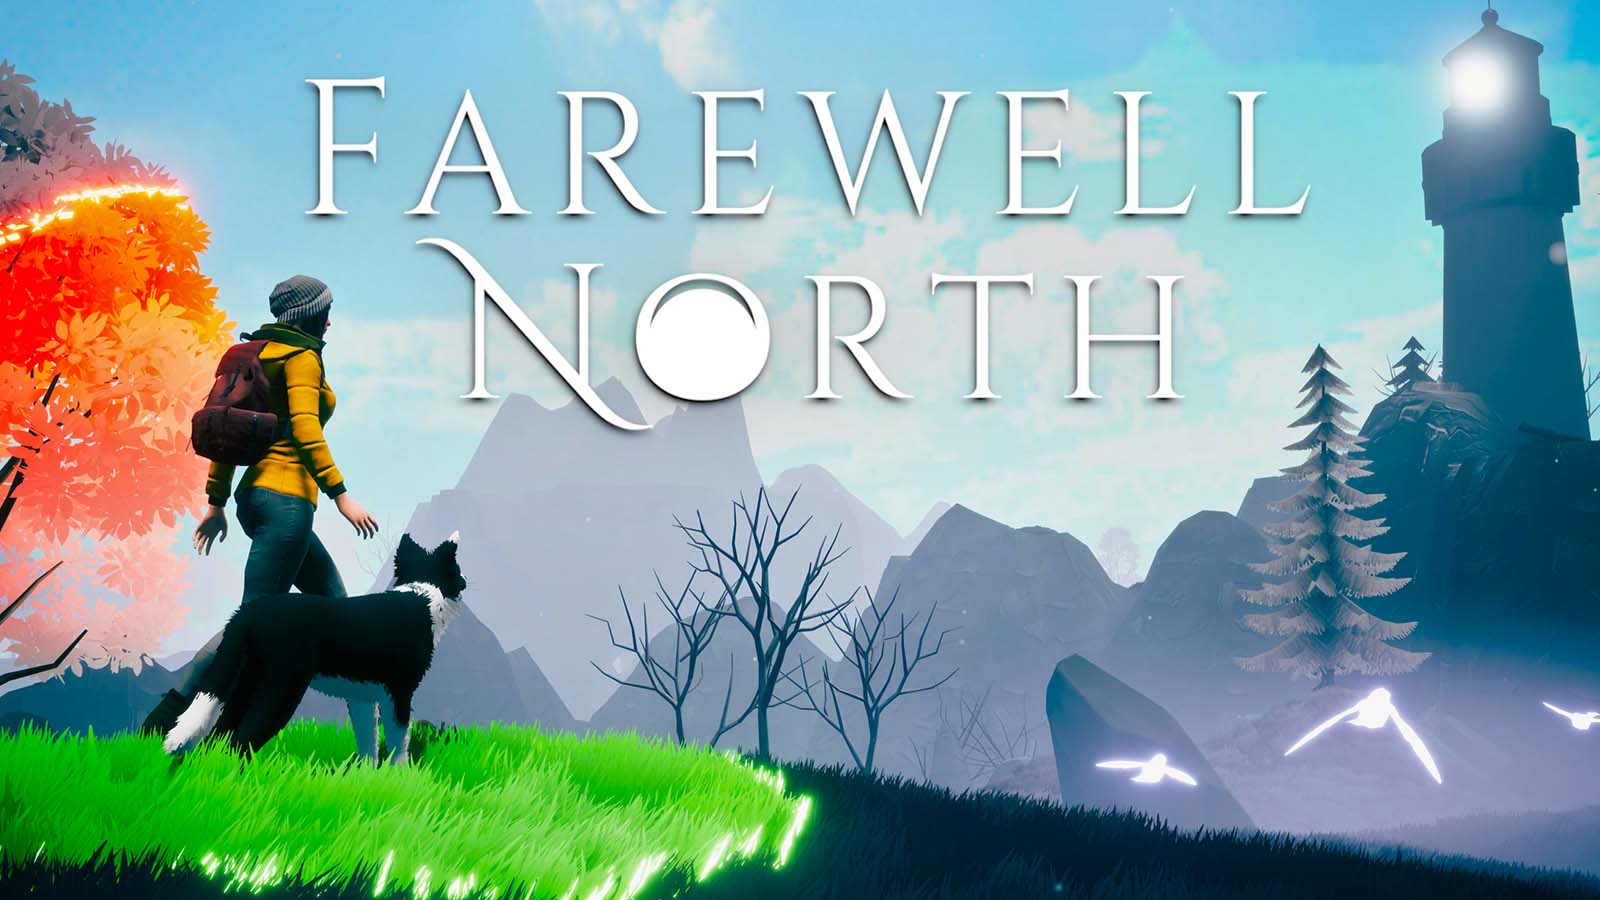 A video game landscape: on the right a dark tall lighthouse with a bright light beaming from the top; on the left a summery colourful scene with grass and trees. A woman in a yellow jacket and red backpack walks towards the tower, accompanied by a border collie dog. Text reads 'Farewell North.'